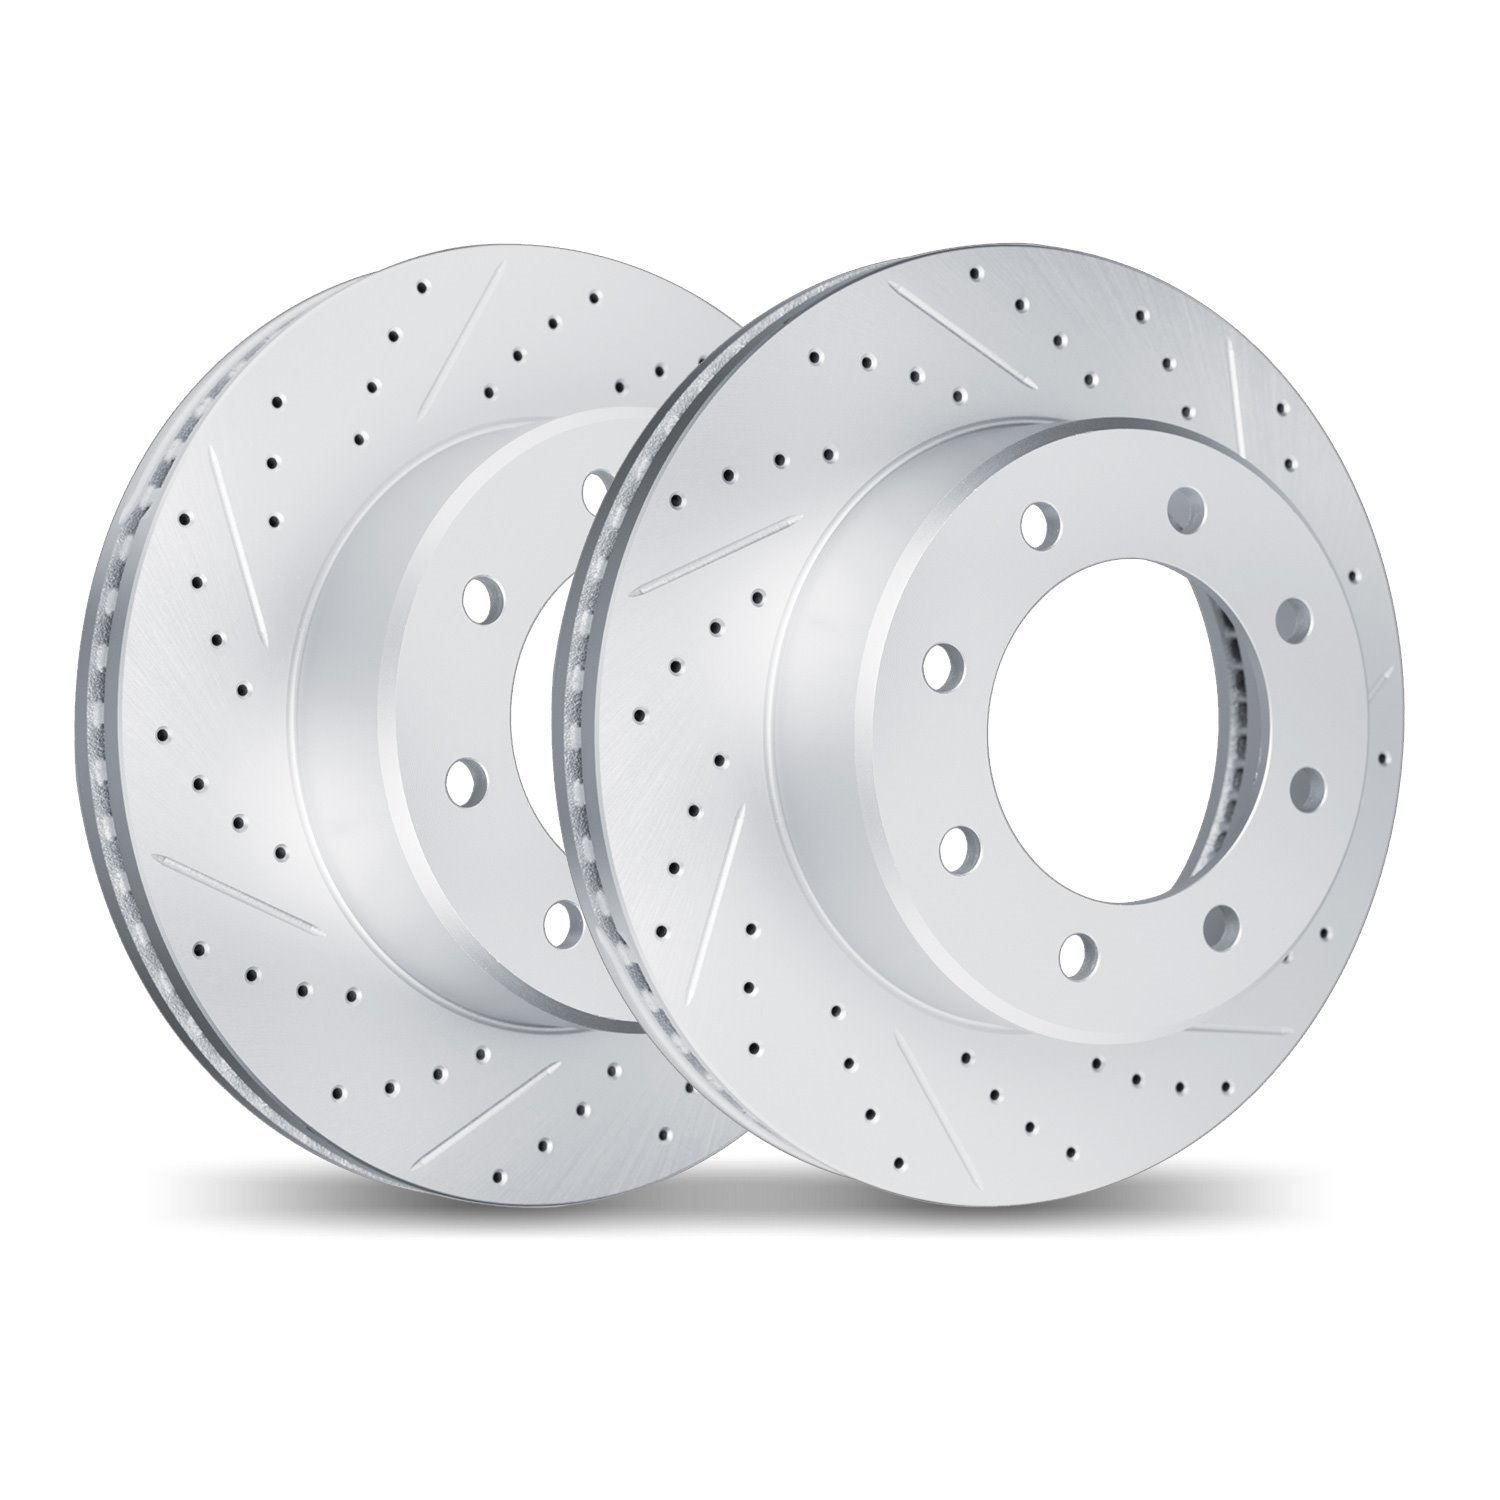 2002-54070 Geoperformance Drilled/Slotted Brake Rotors, 2006-2010 Ford/Lincoln/Mercury/Mazda, Position: Front